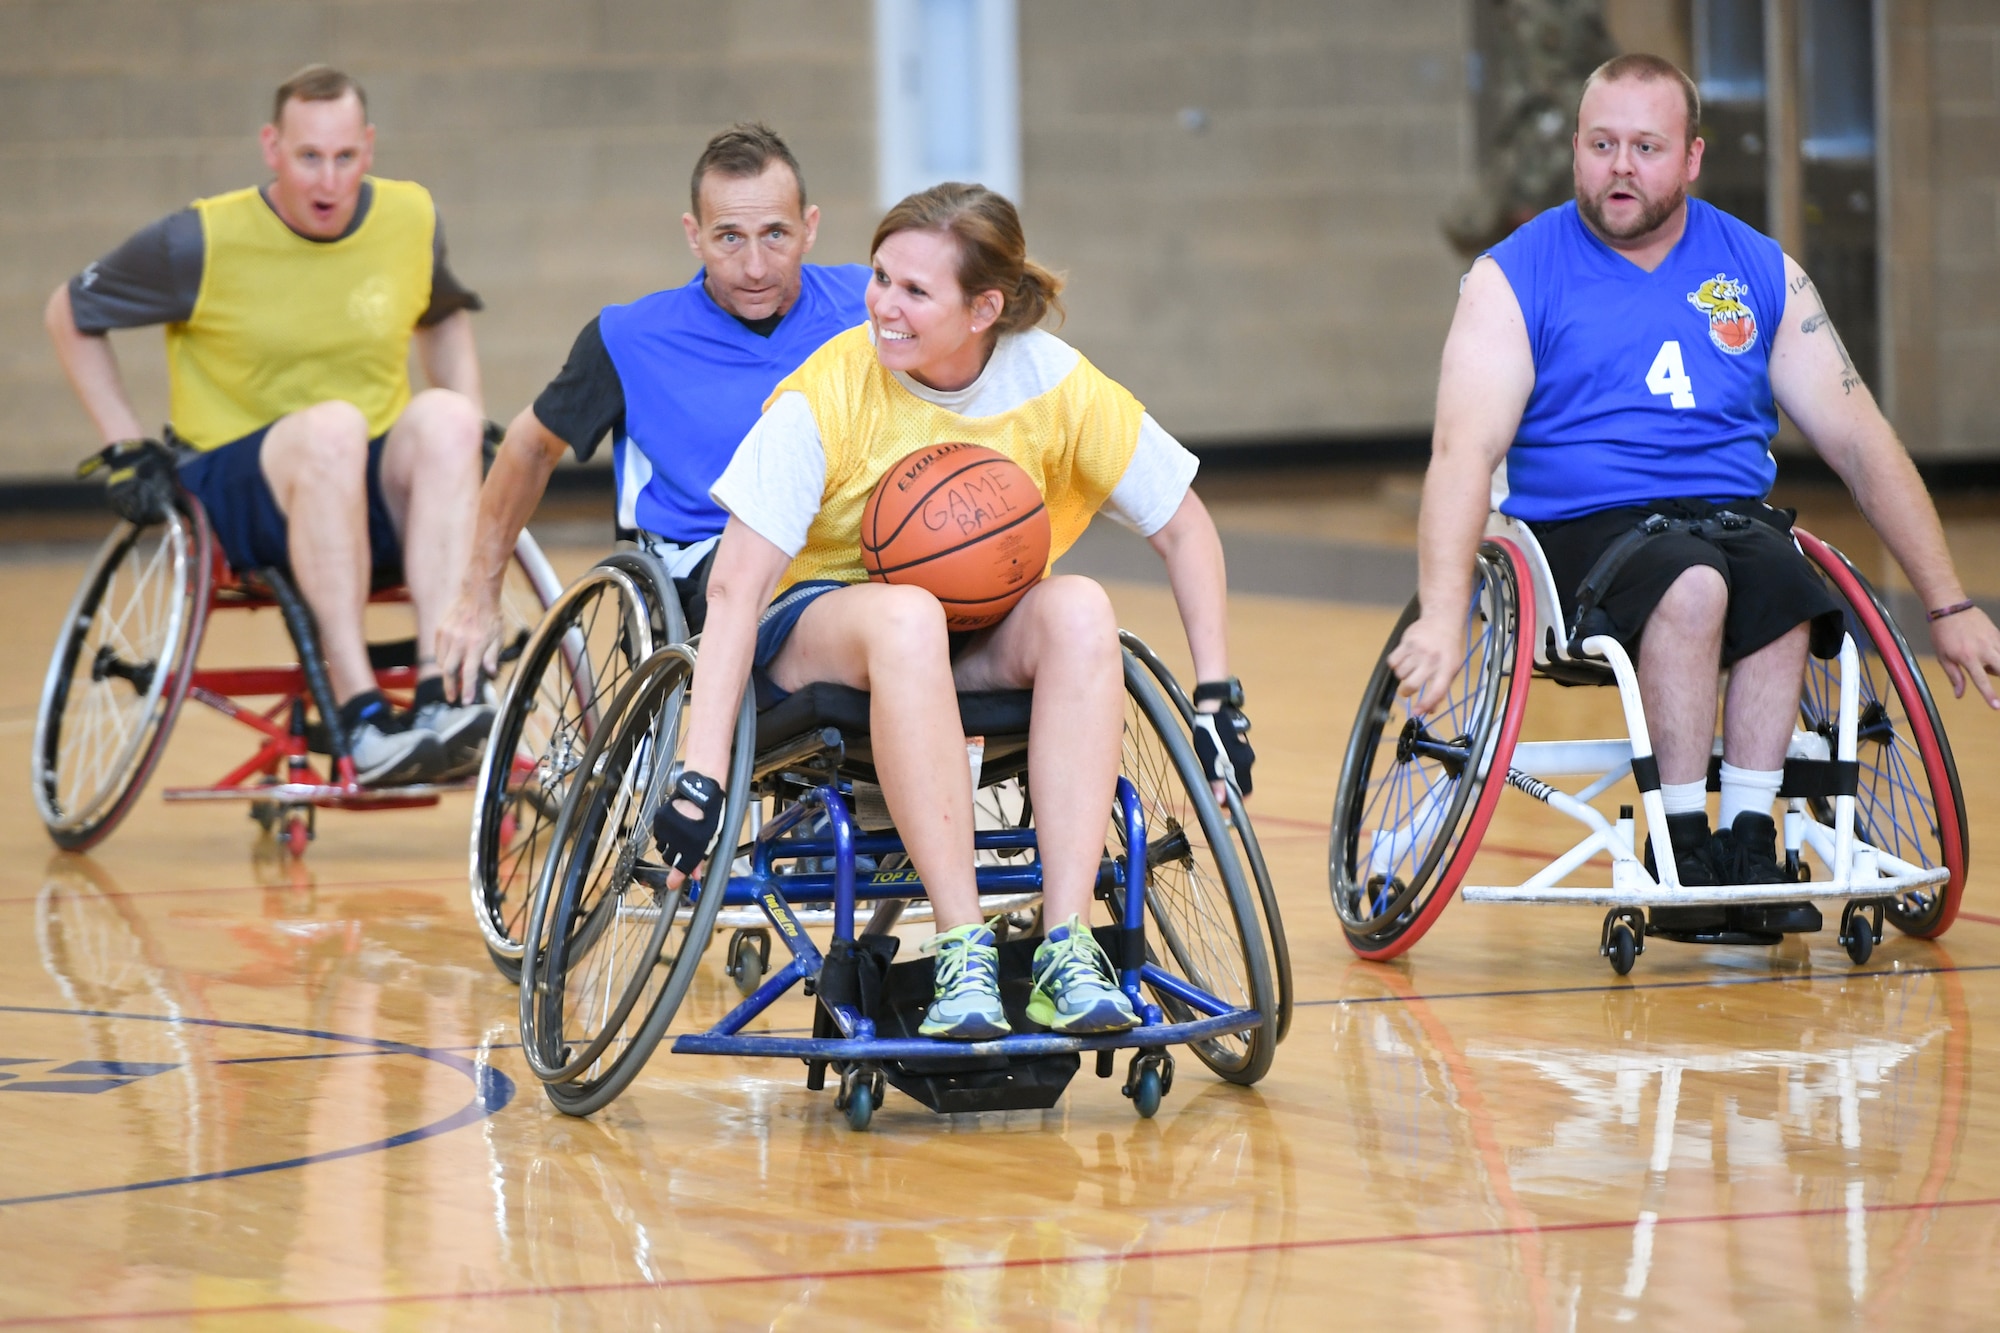 Colonel Regina Sabric, 419th Fighter Wing commander, runs with the ball during a wheelchair basketball game Oct. 9, 2019 at Hill Air Force Base, Utah. Leaders from Hill's units faced off against the Ogden Wheelin' Wildcats, a semi-professional wheelchair basketball team, to celebrate National Disability Employment Awareness Month. (U.S. Air Force photo by Cynthia Griggs)